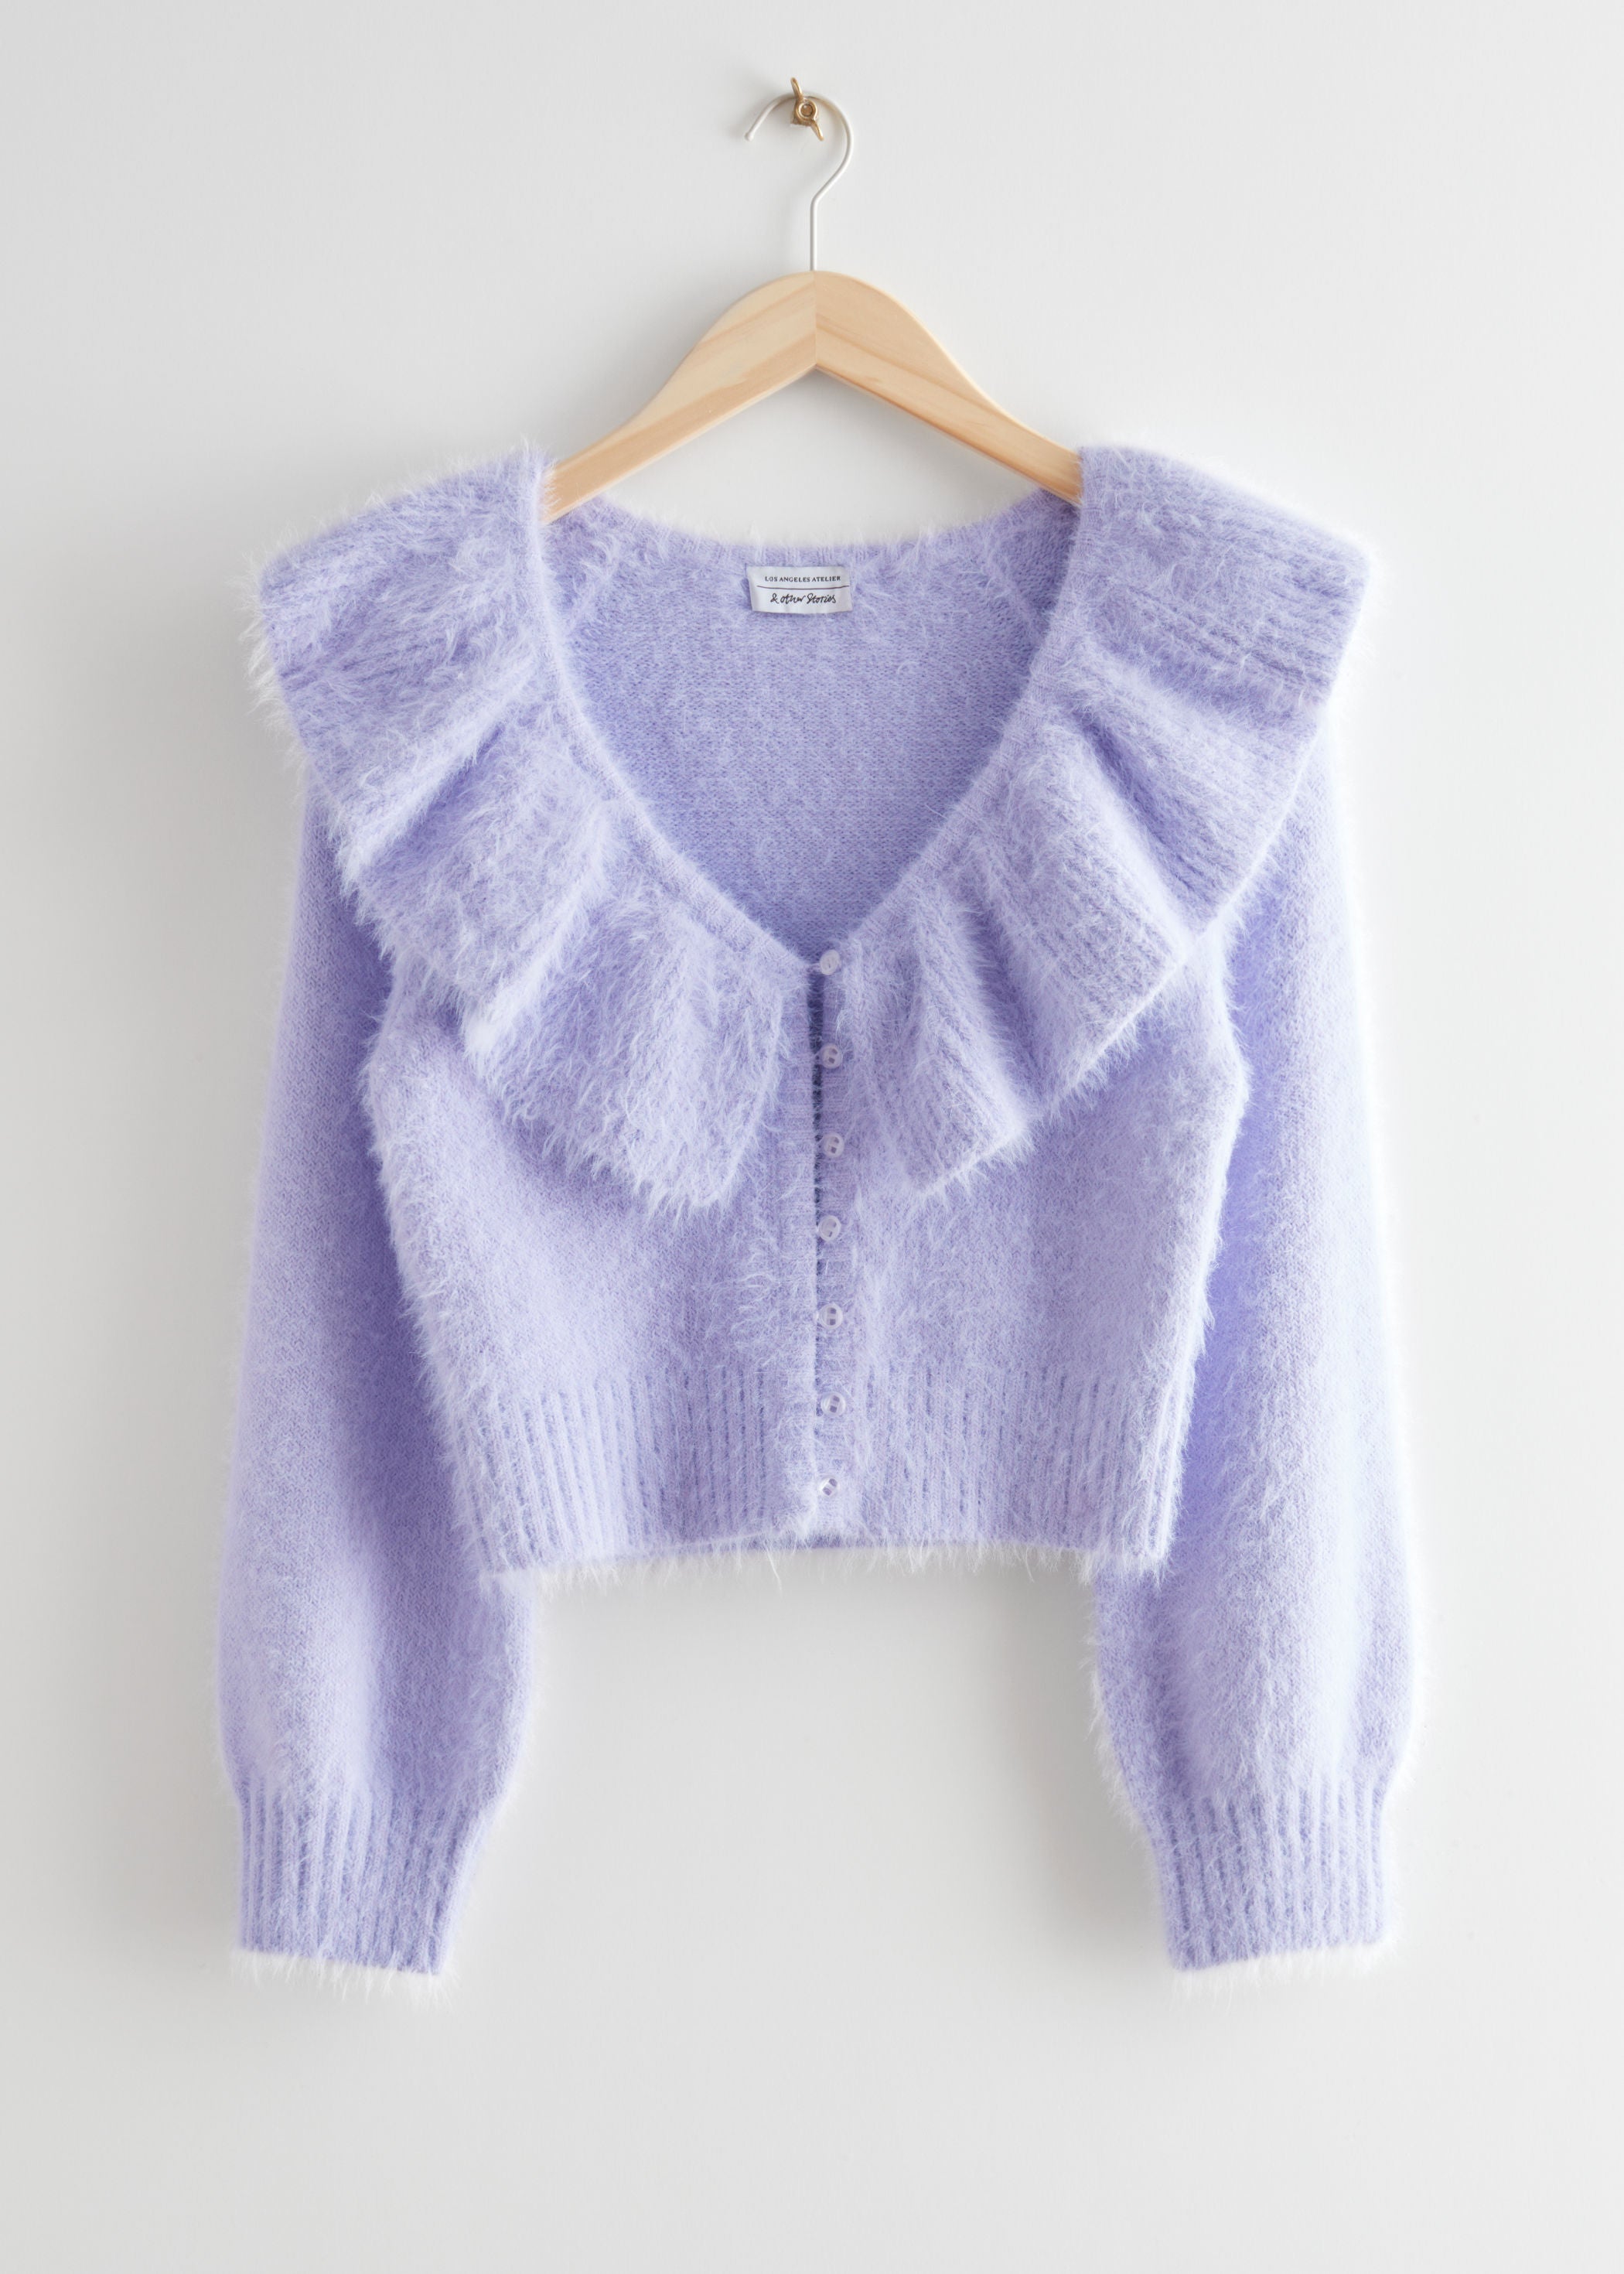 & Other Stories + Fuzzy Cropped Ruffle Collar Cardigan